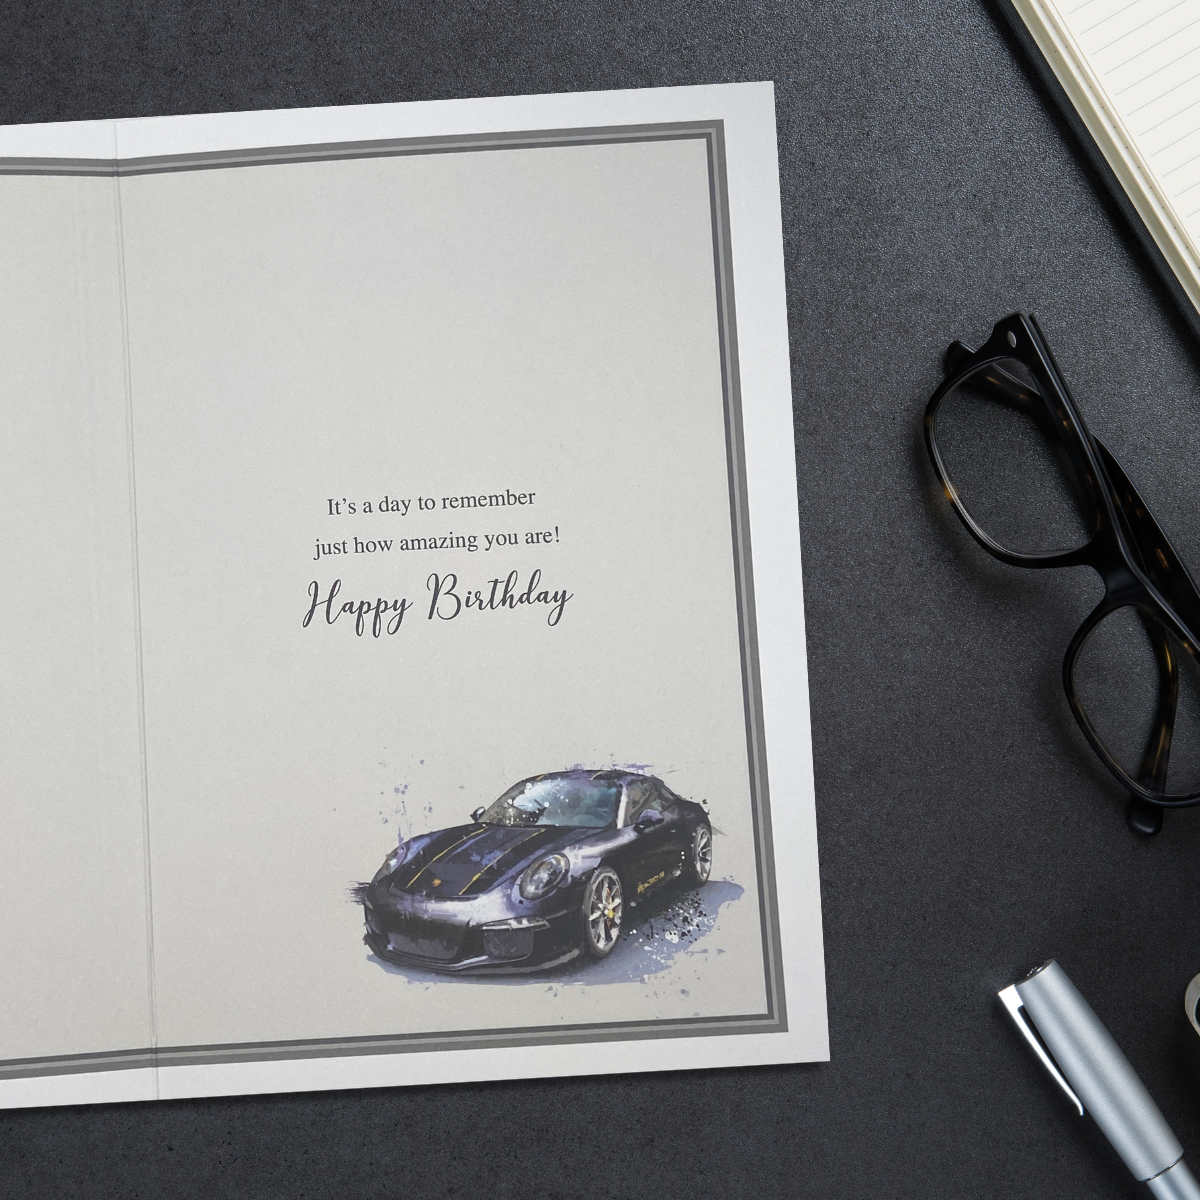 Inside image with grey border and car illustration beside verse